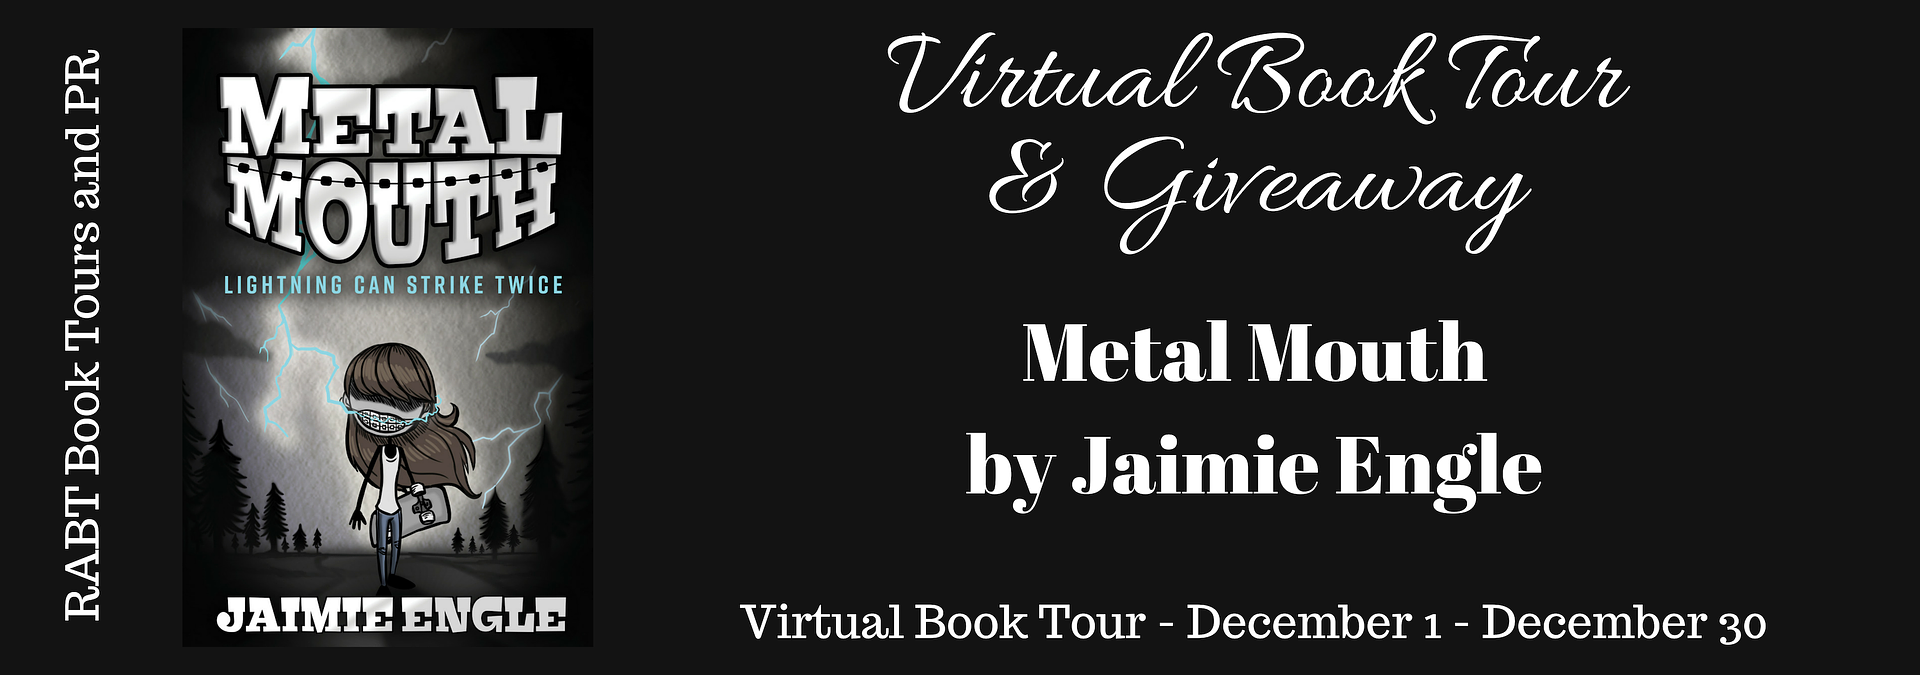 Interview With Author of Metal Mouth - Jaimie Engle @theWRITEengle #interview #author @RABTBookTours